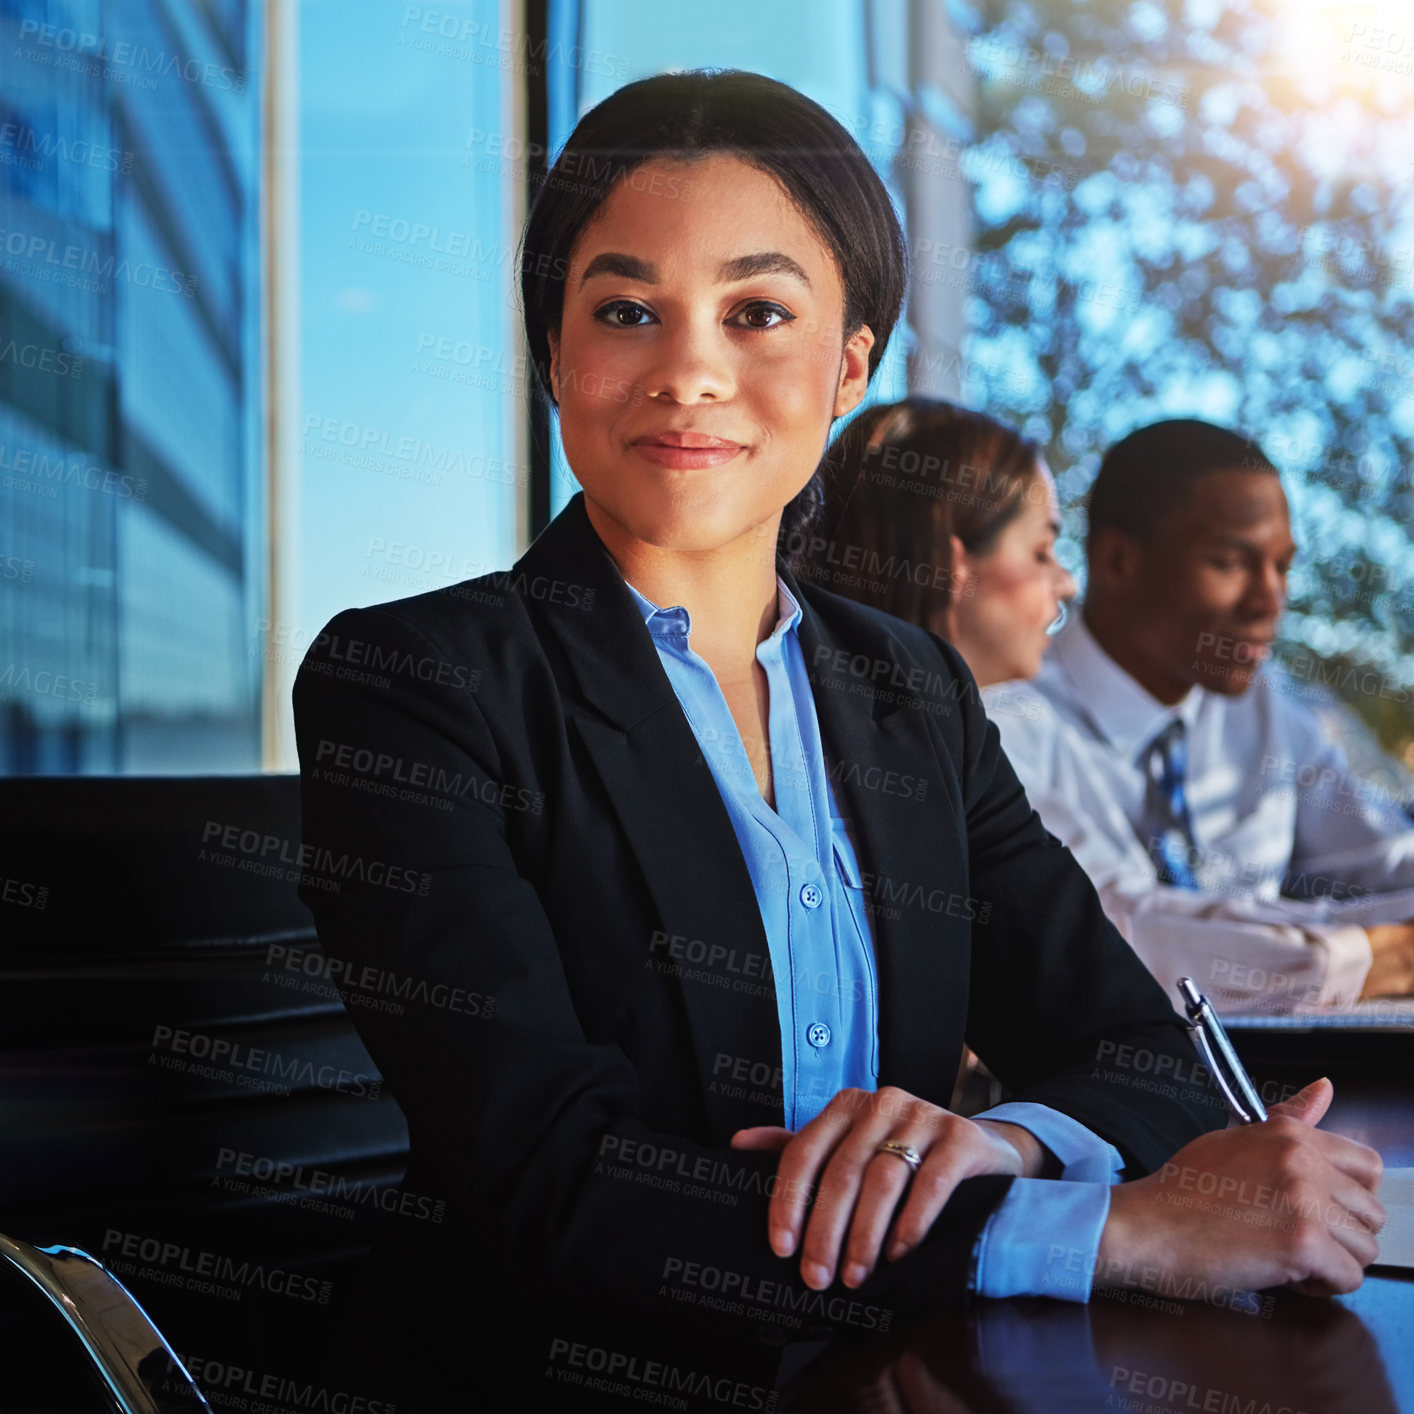 Buy stock photo Cropped portrait of a young businesswoman sitting in a meeting with her boardroom